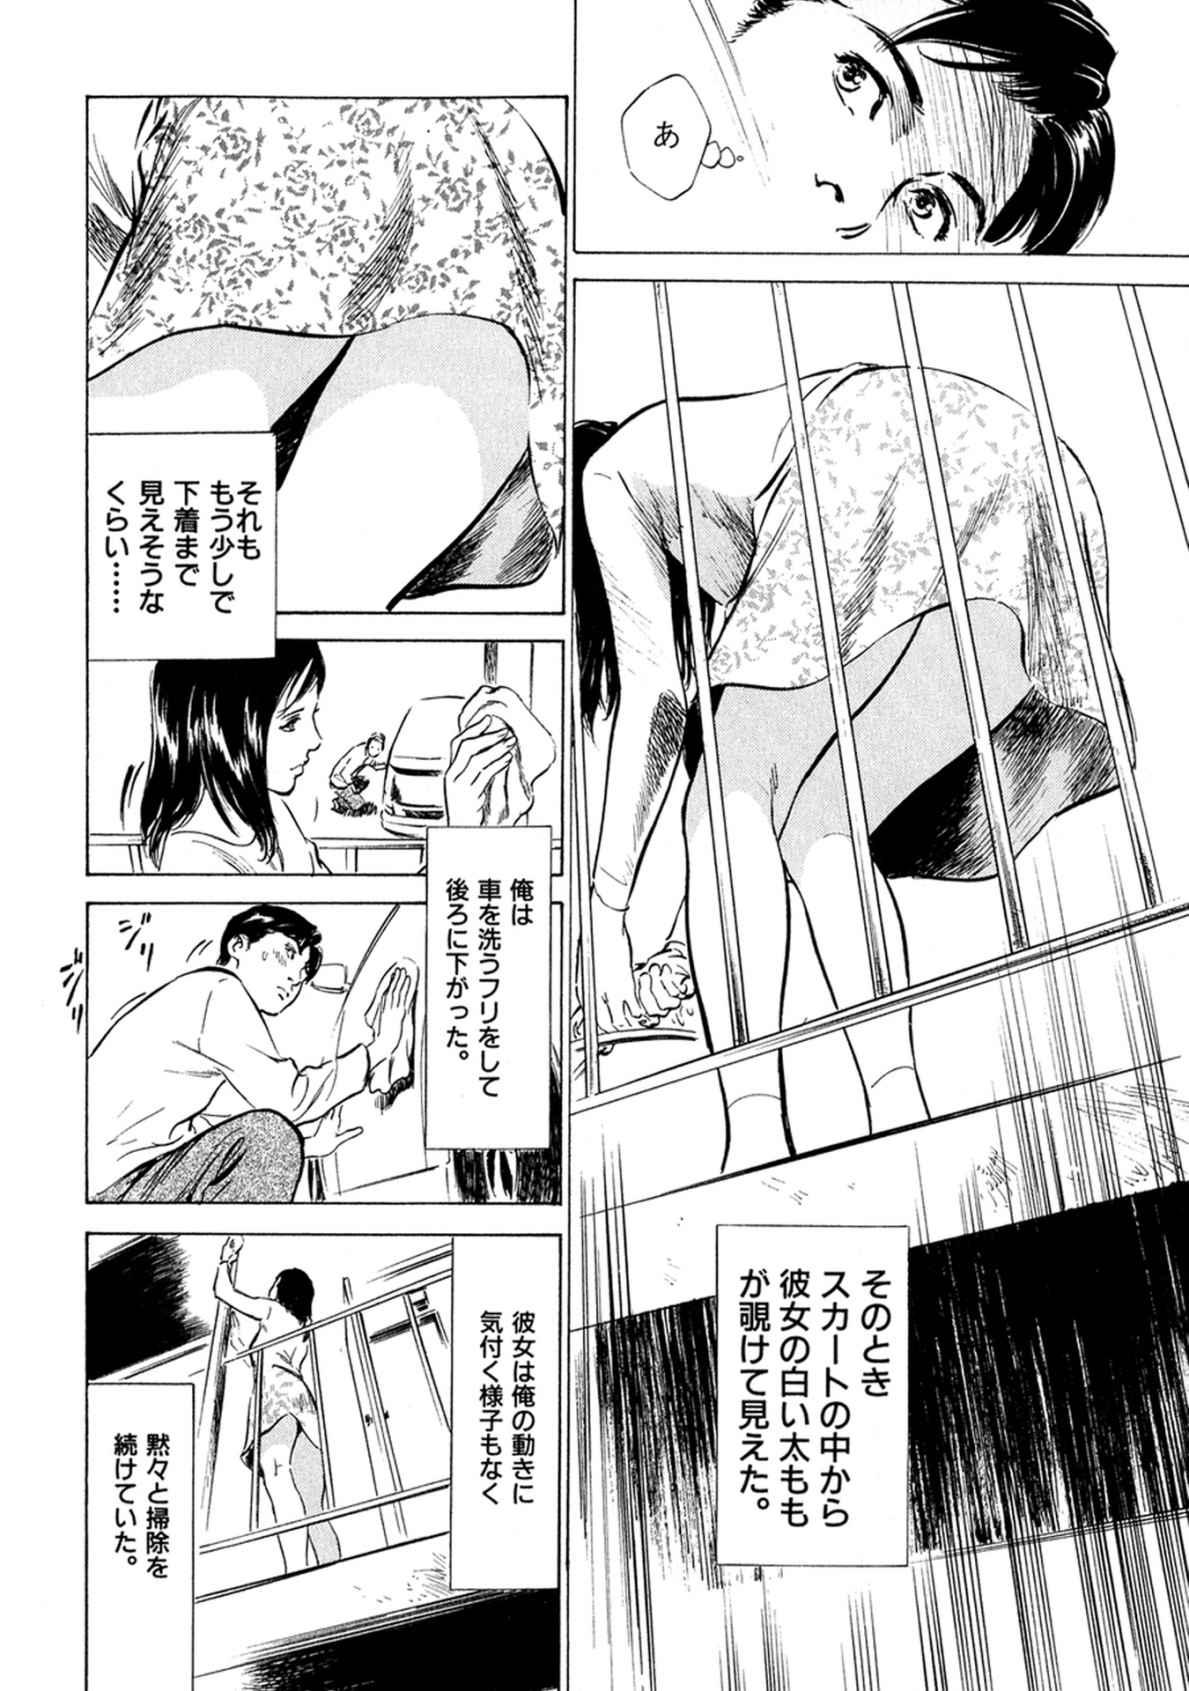 Pay 八月薫全集 第1巻 不倫は服を着て歩く Old Young - Page 6